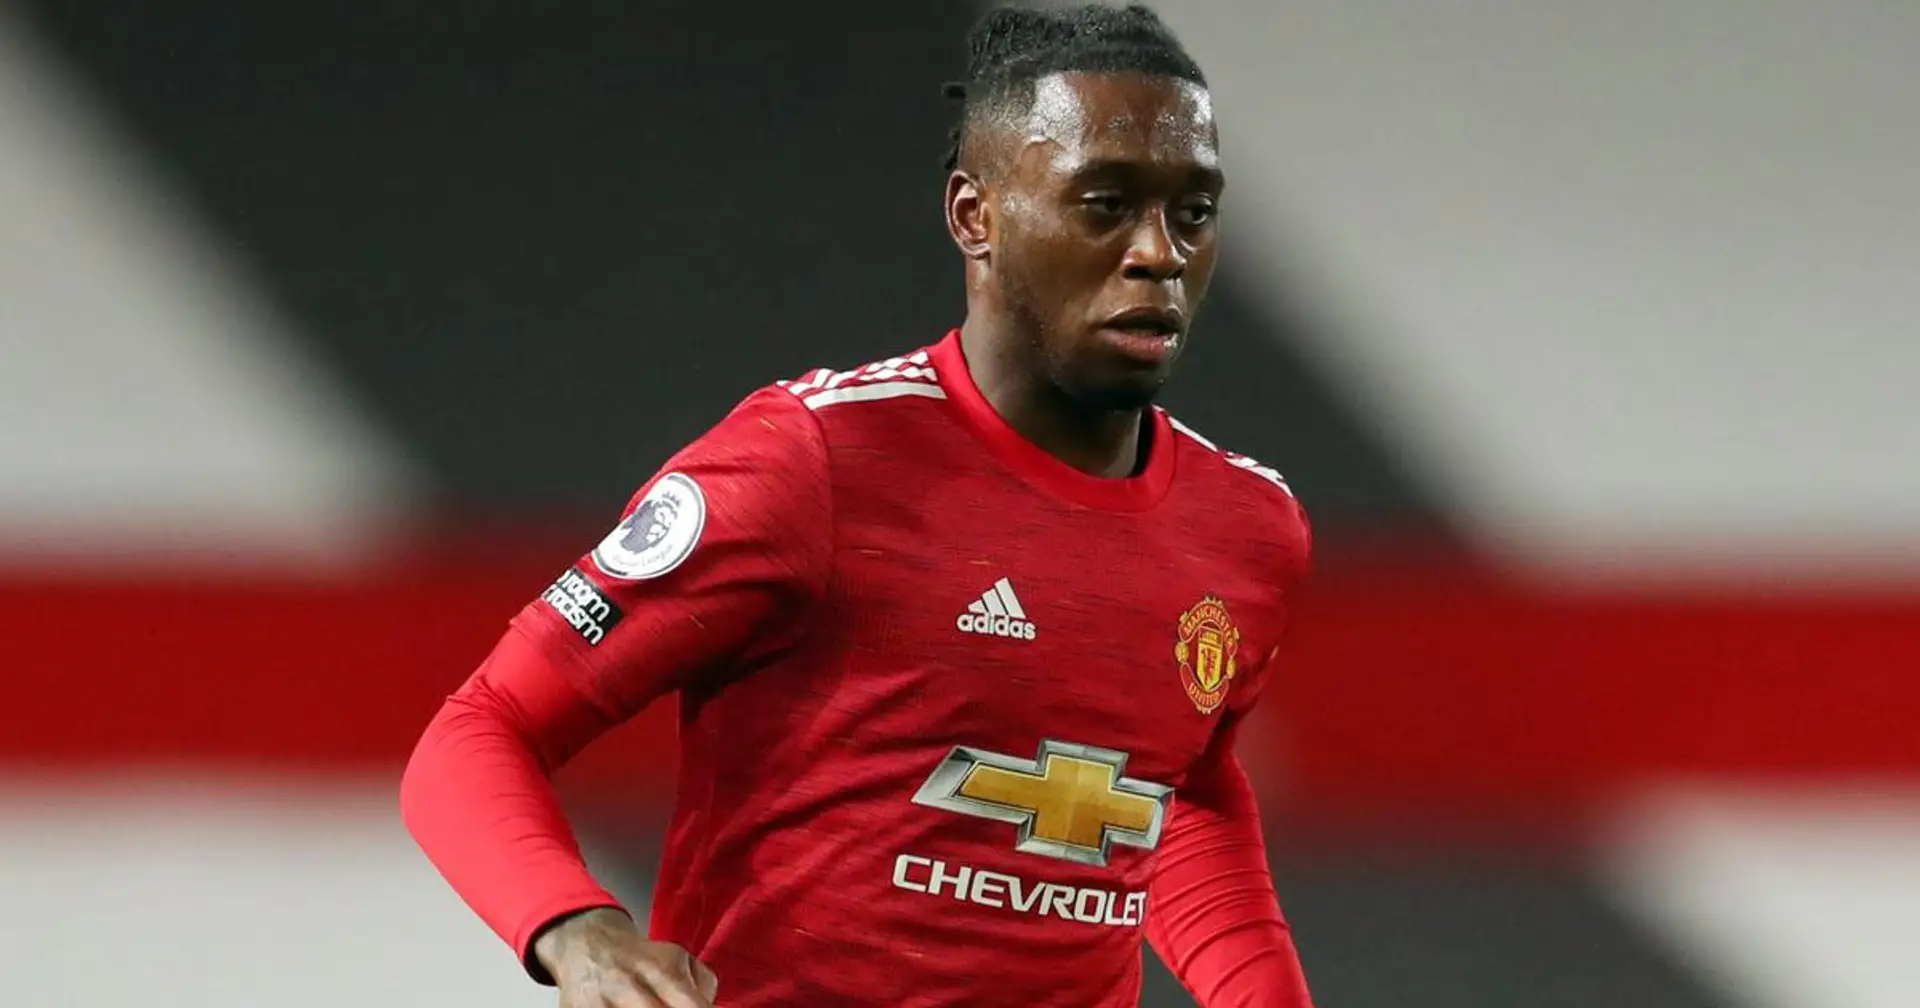 MEN: Wan-Bissaka back in United training ahead of Wolves clash